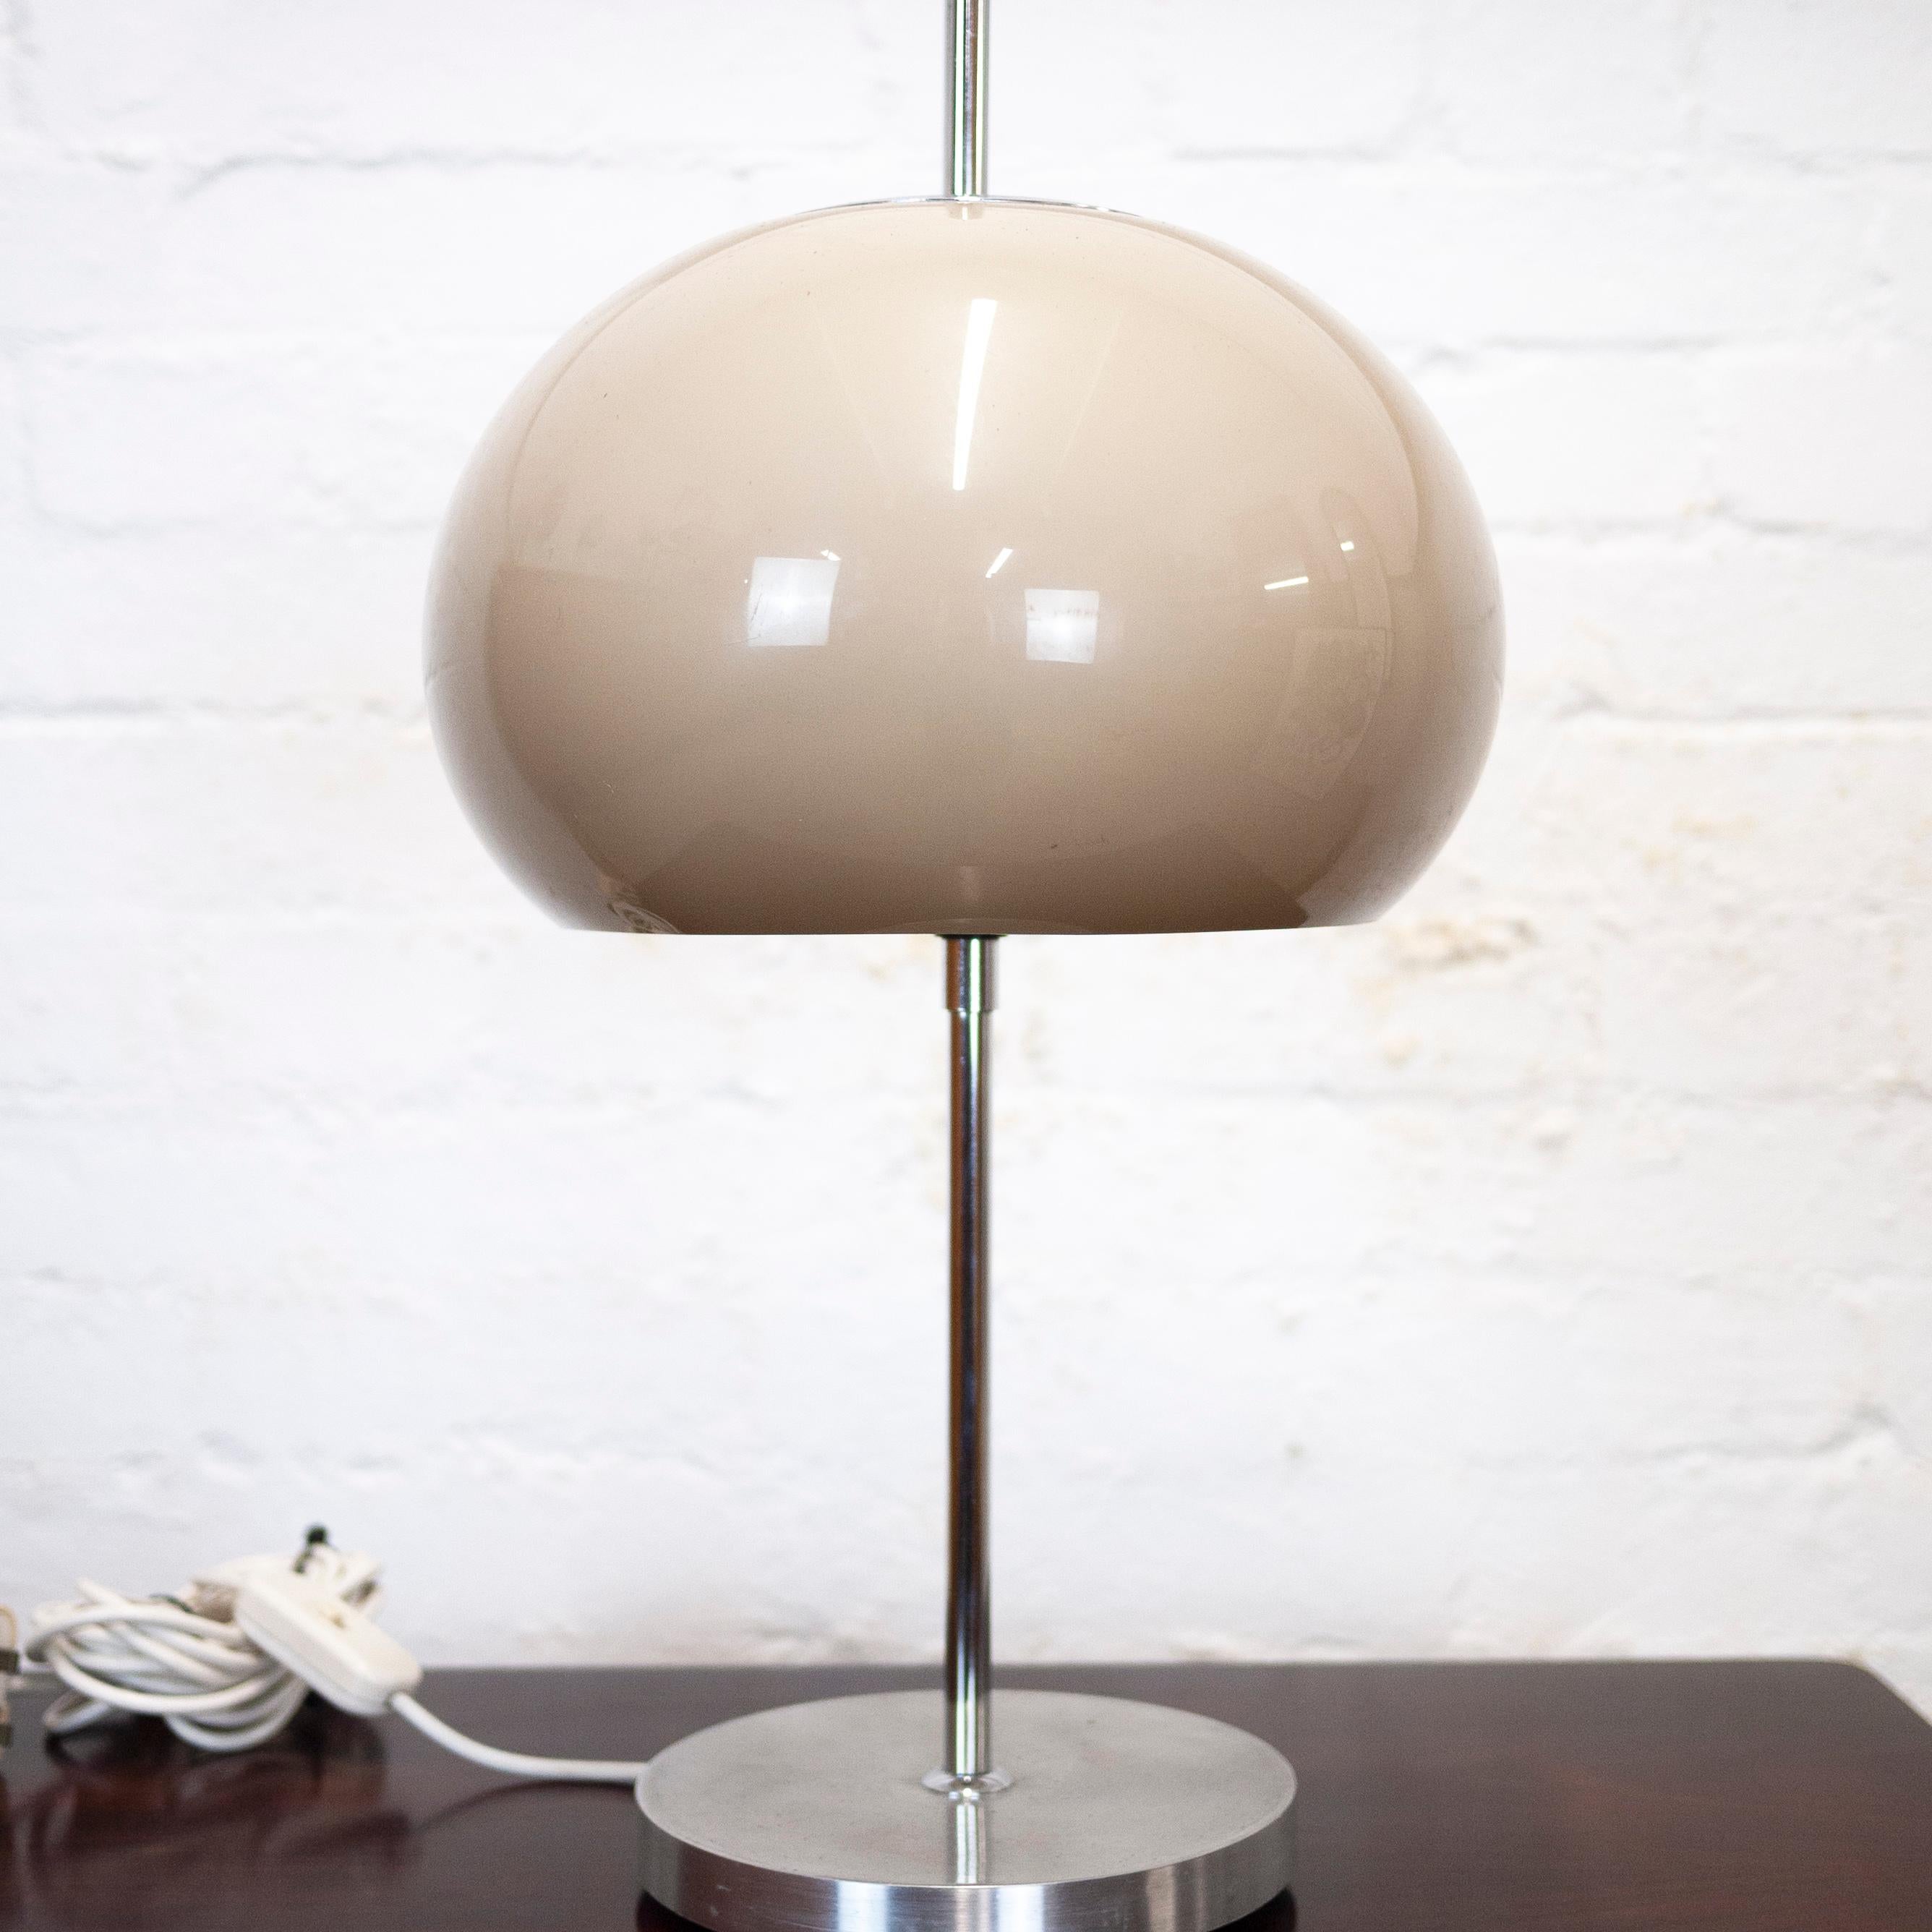 A 1970s Italian desk lamp by Prova. It features a mushroom shaped shade and sits on a tall metal stem.

Manufacturer -Prova

DesignPeriod - 1970 to 1979

Country of Manufacture - Italy

Attribution Marks - None

Detailed Condition - Good